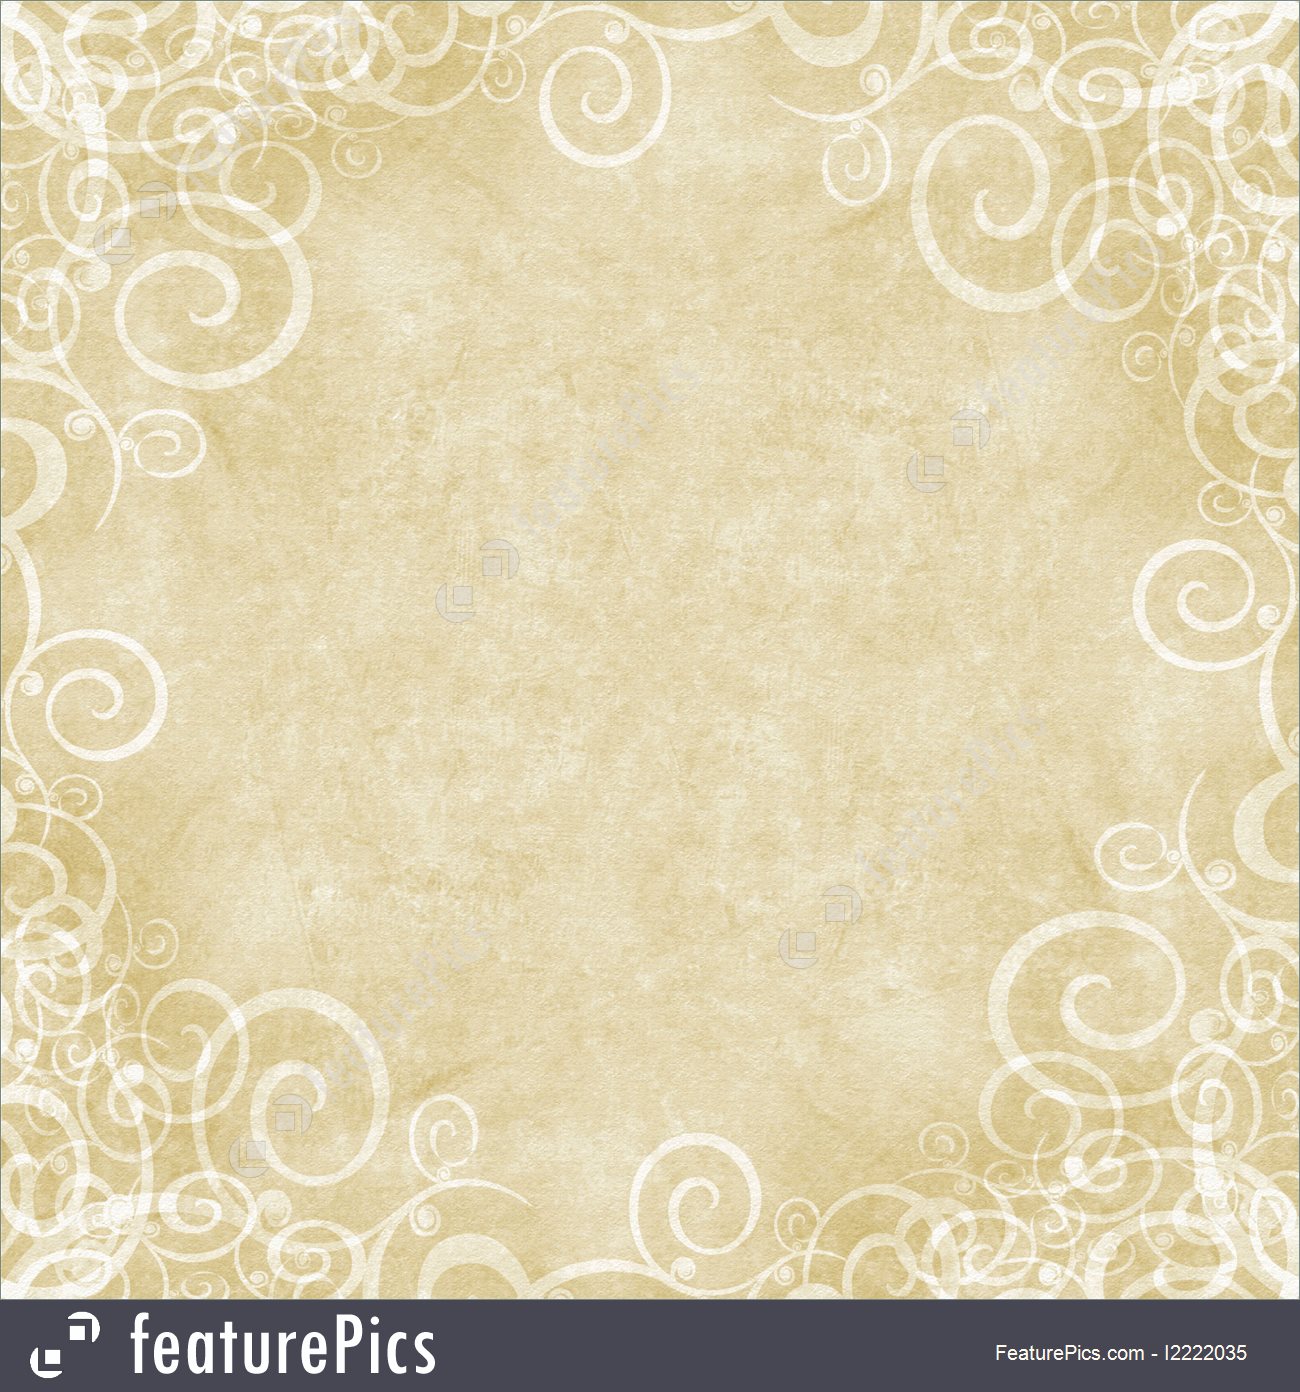 Templates Tan And Cream Grunge Swirl Framed Background Stock